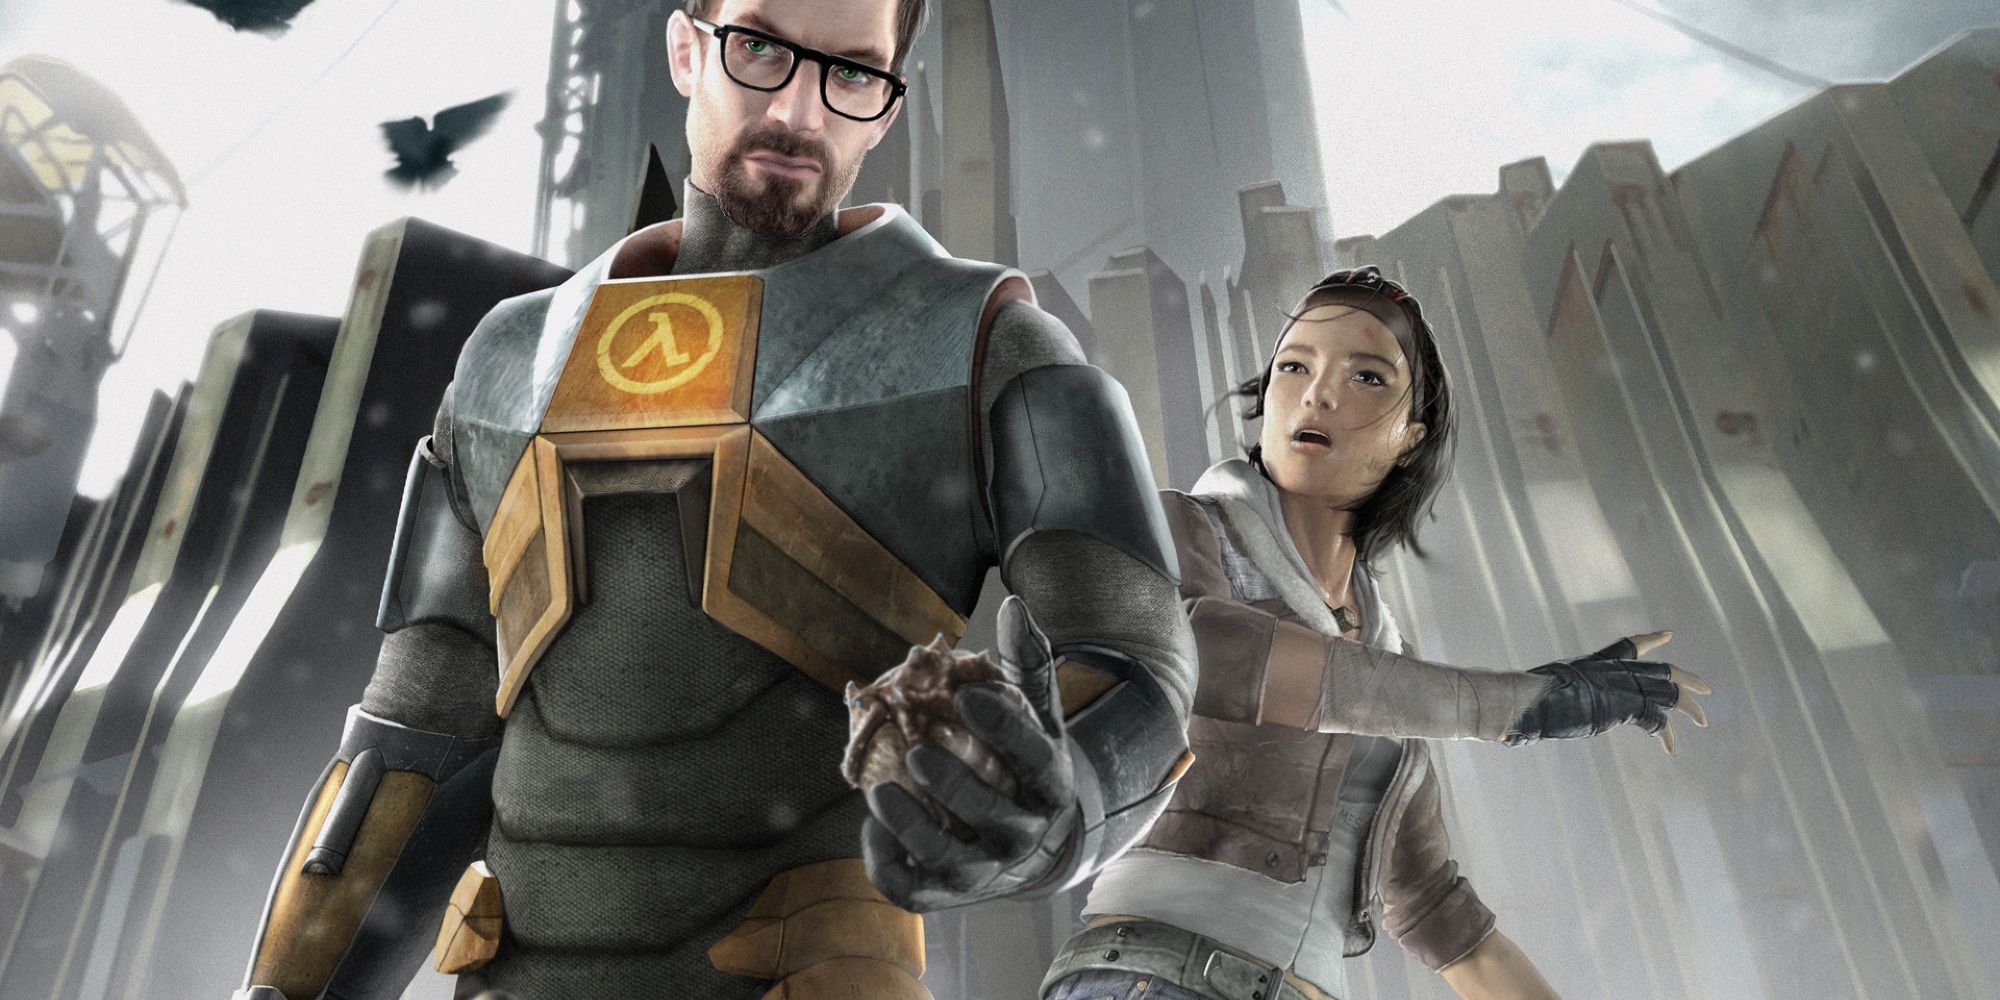 poster for the game Half Life 2 featuring the main characters Gordon Freeman and Alyx Vance